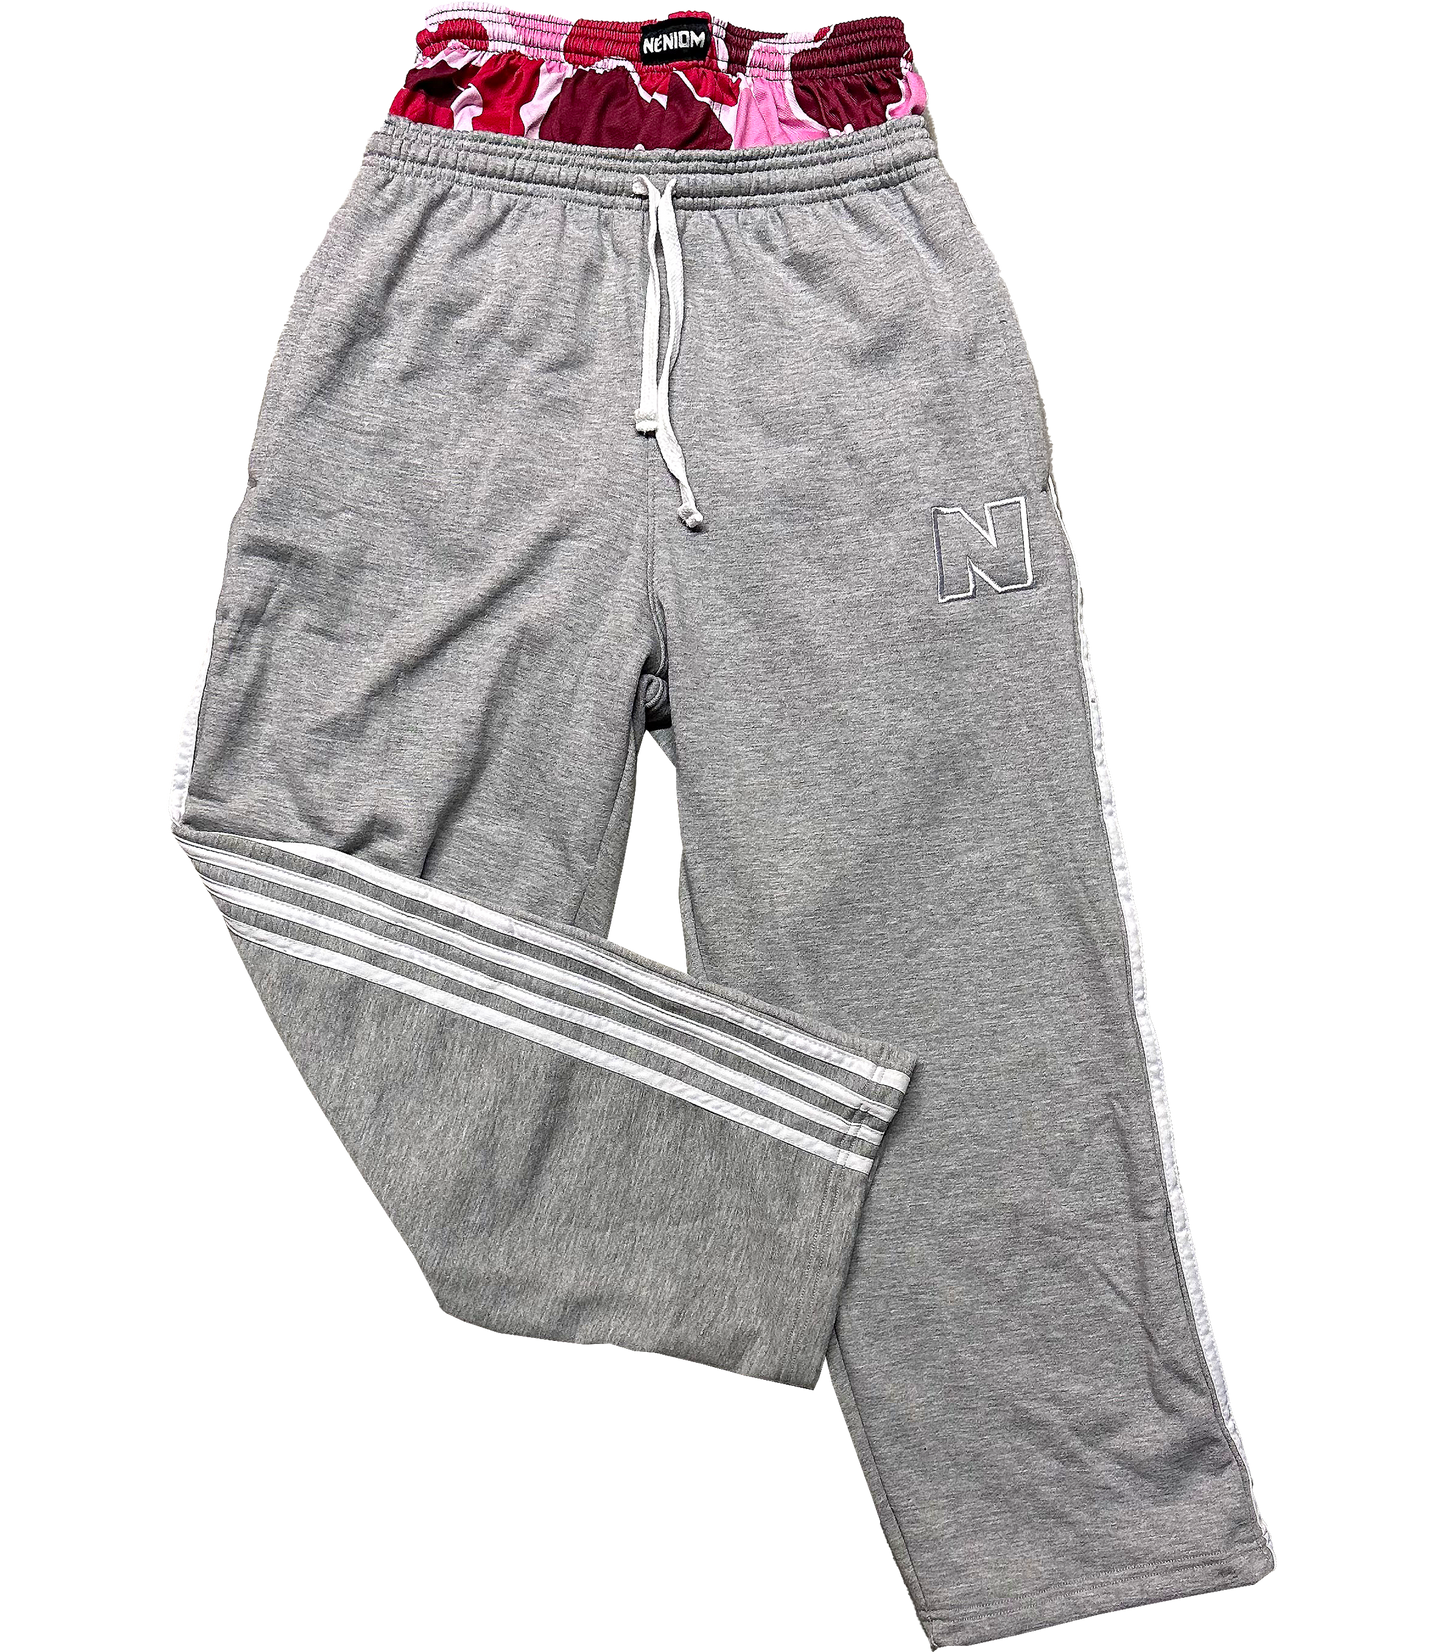 ★ LIMITED ★ 4 STRIPED SAGGING SWEATPANTS W PINK CAMO SHORTS